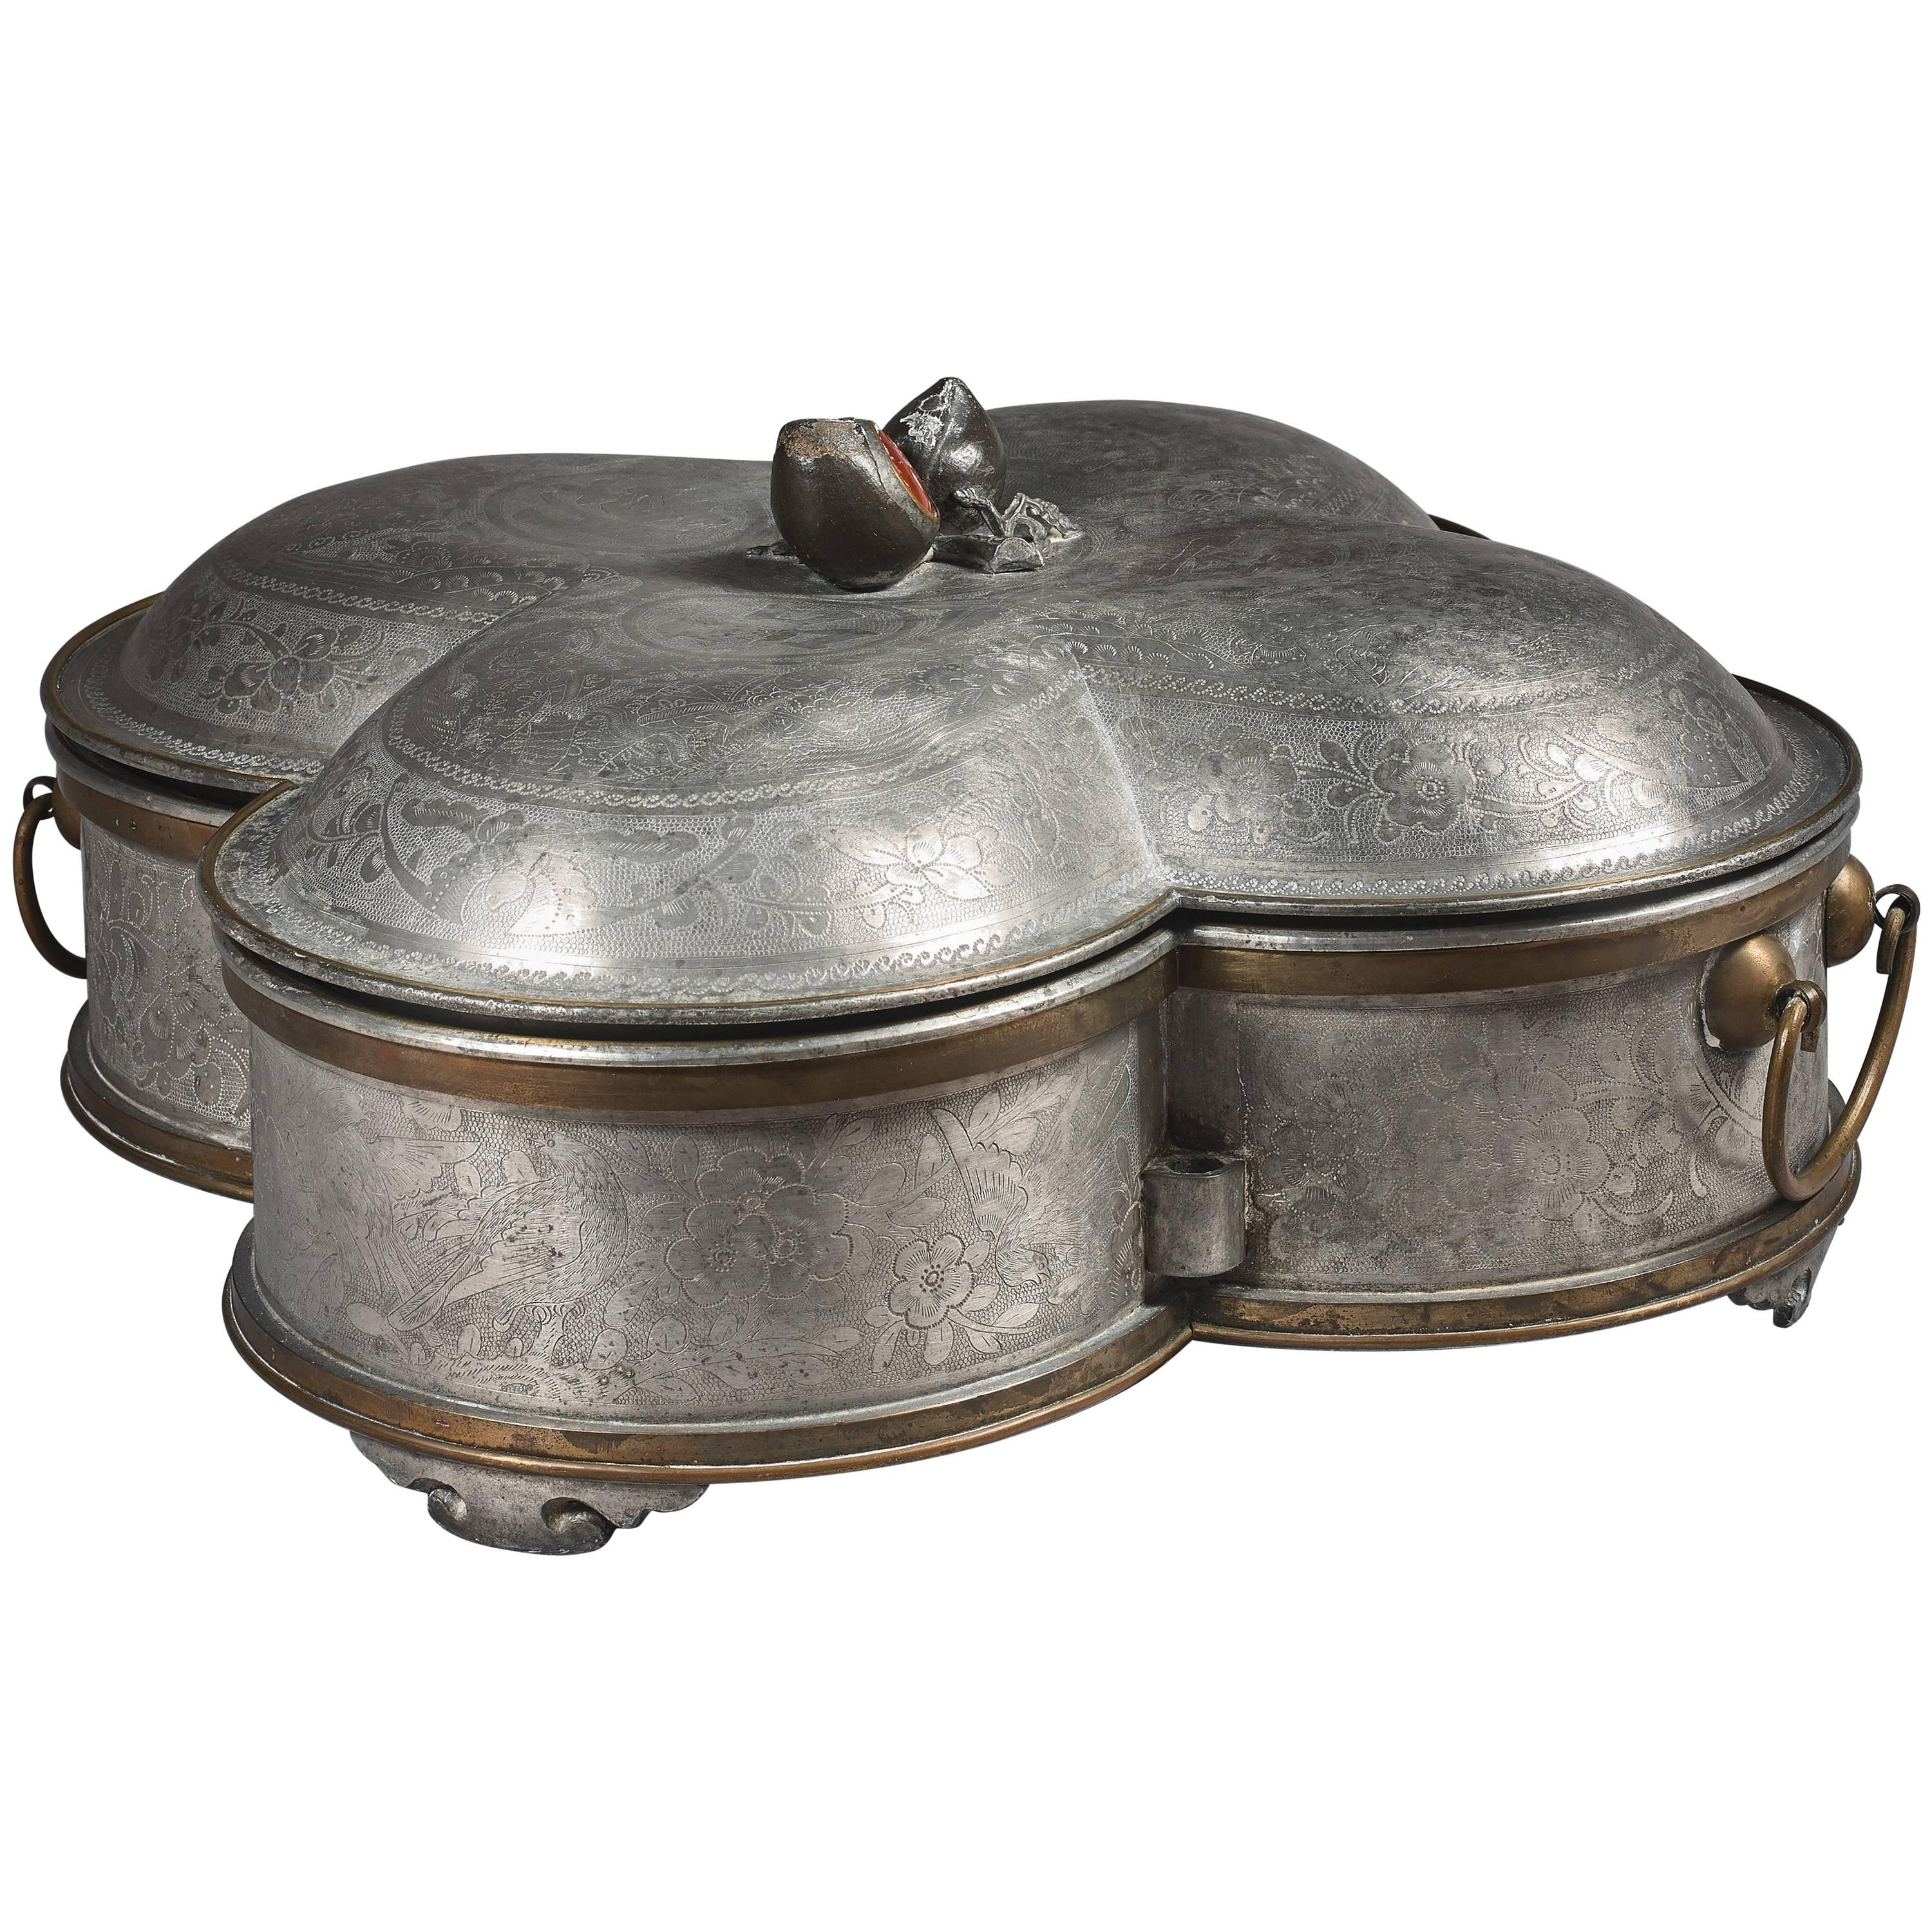 Rare 19th Century Chinese Pewter and Hardstones Fondue Set For Sale